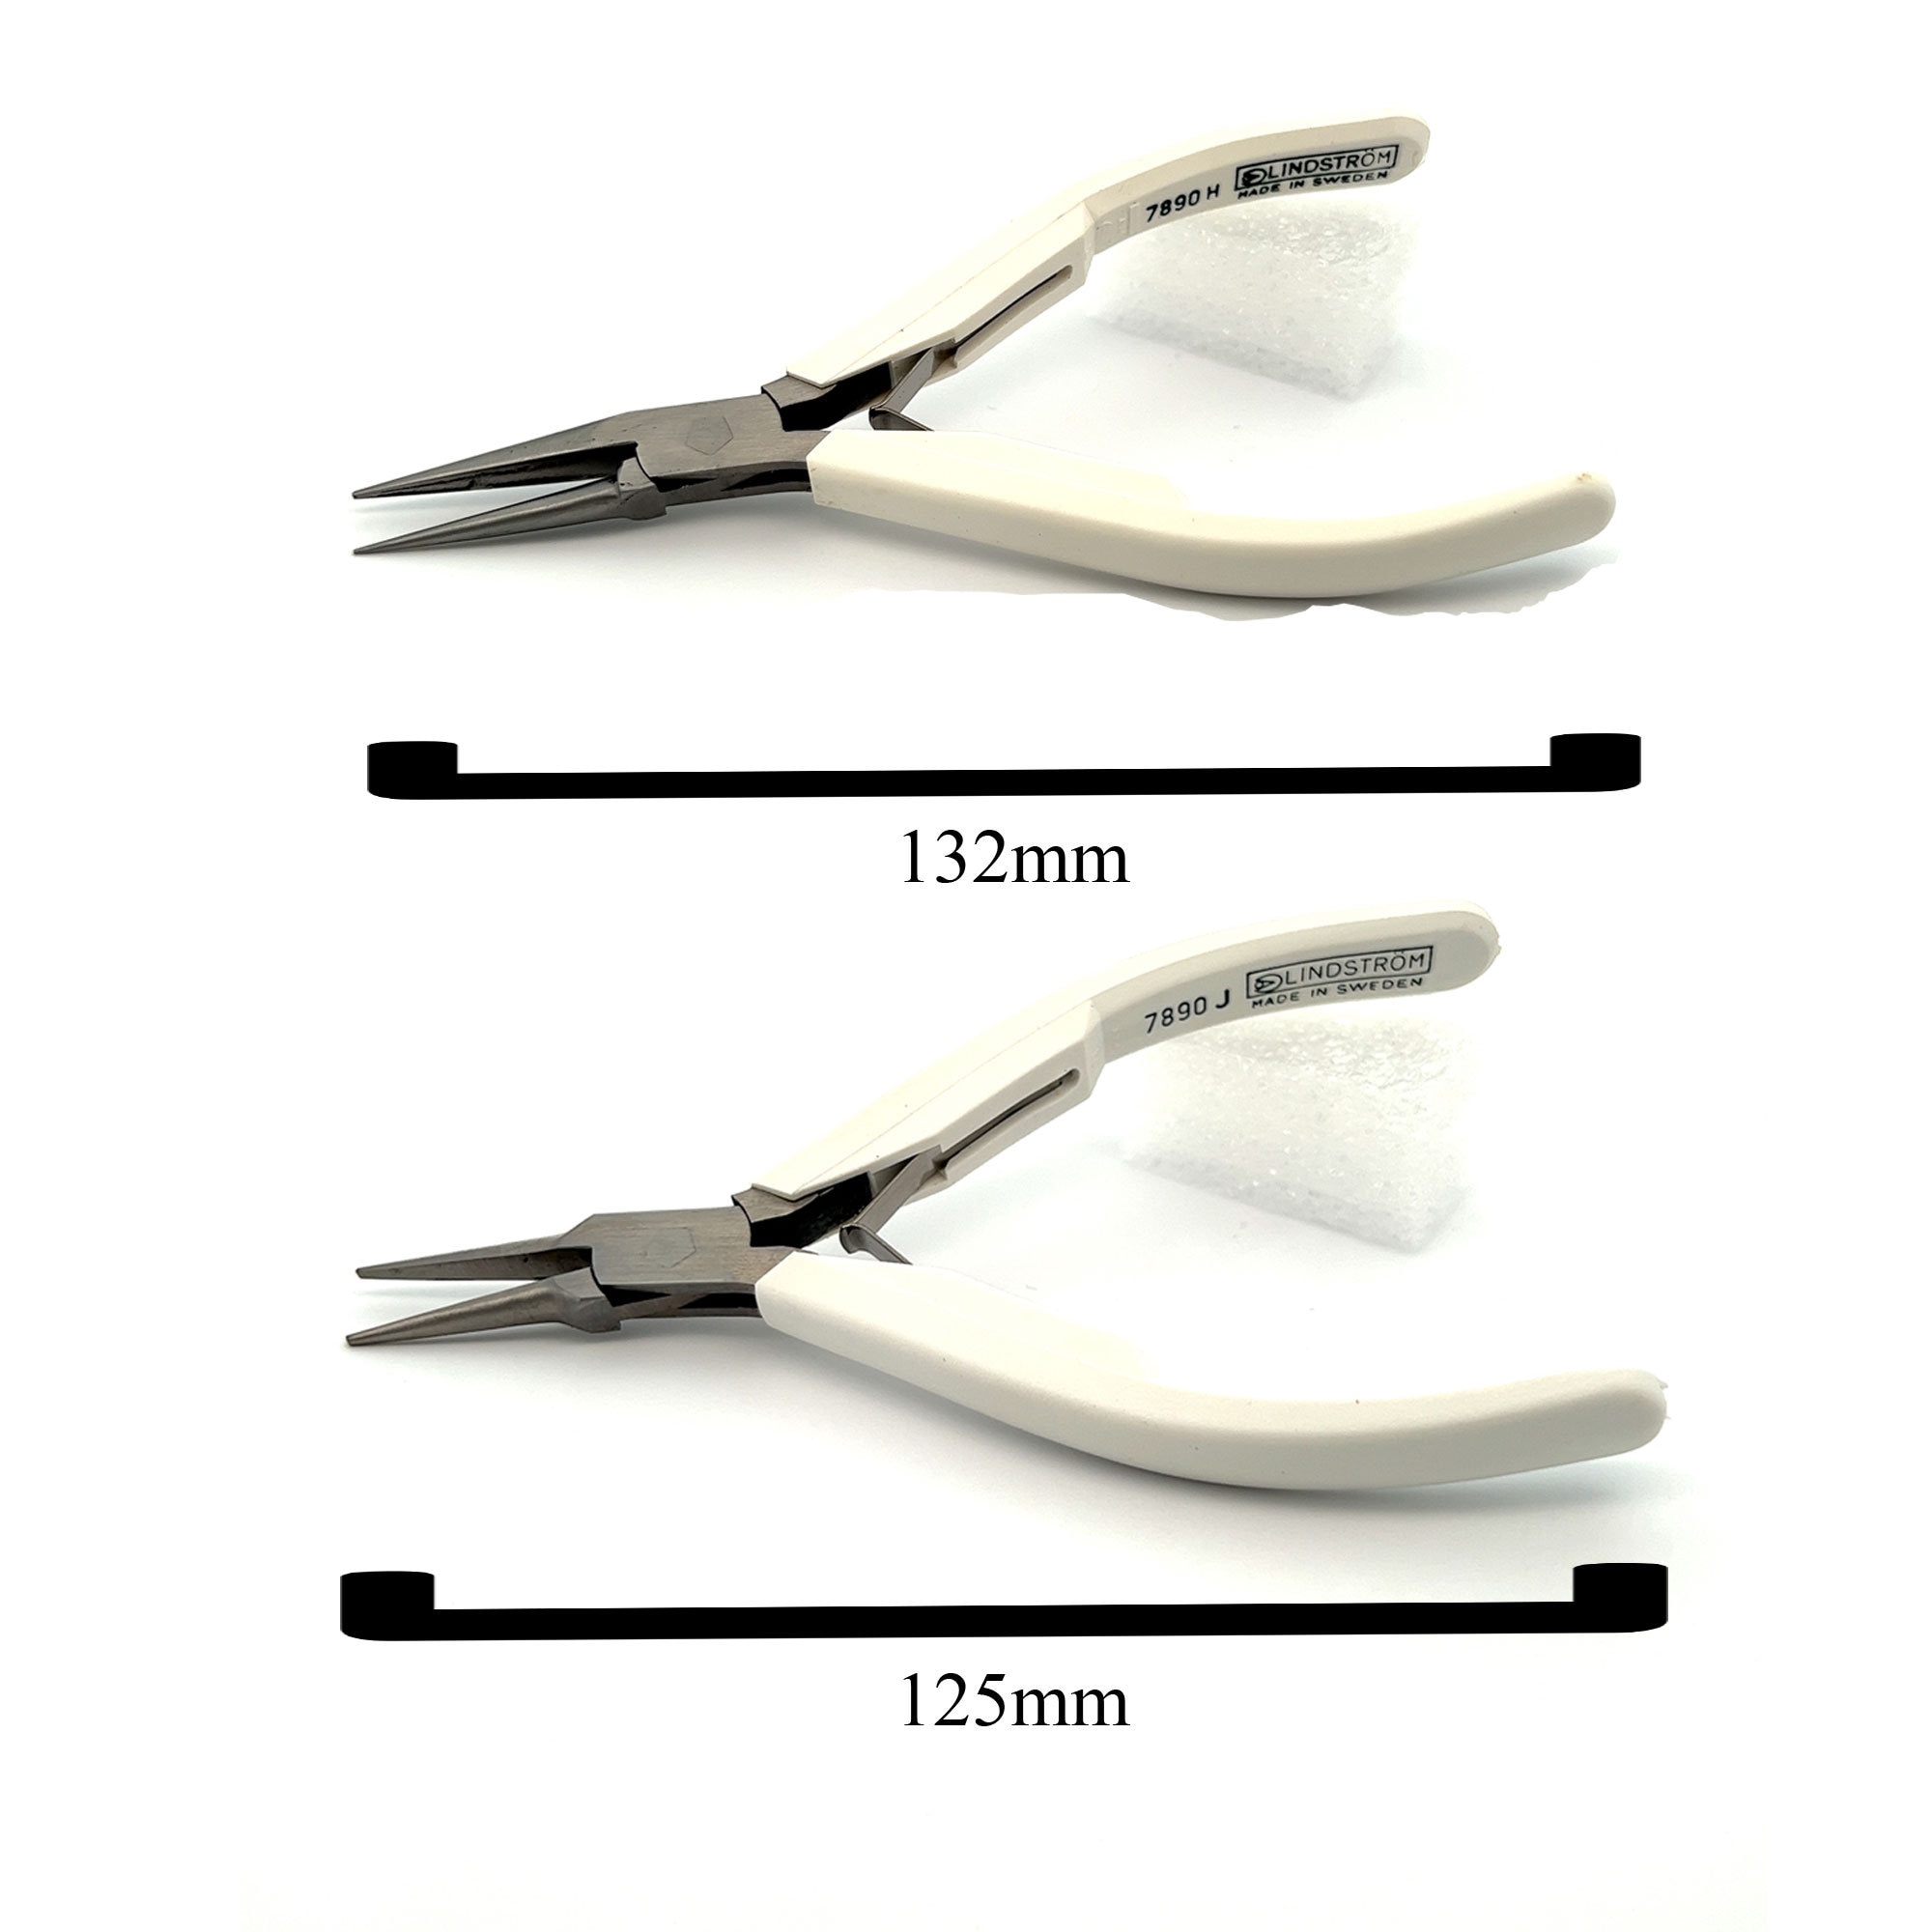 Round-nose pliers, good quality.